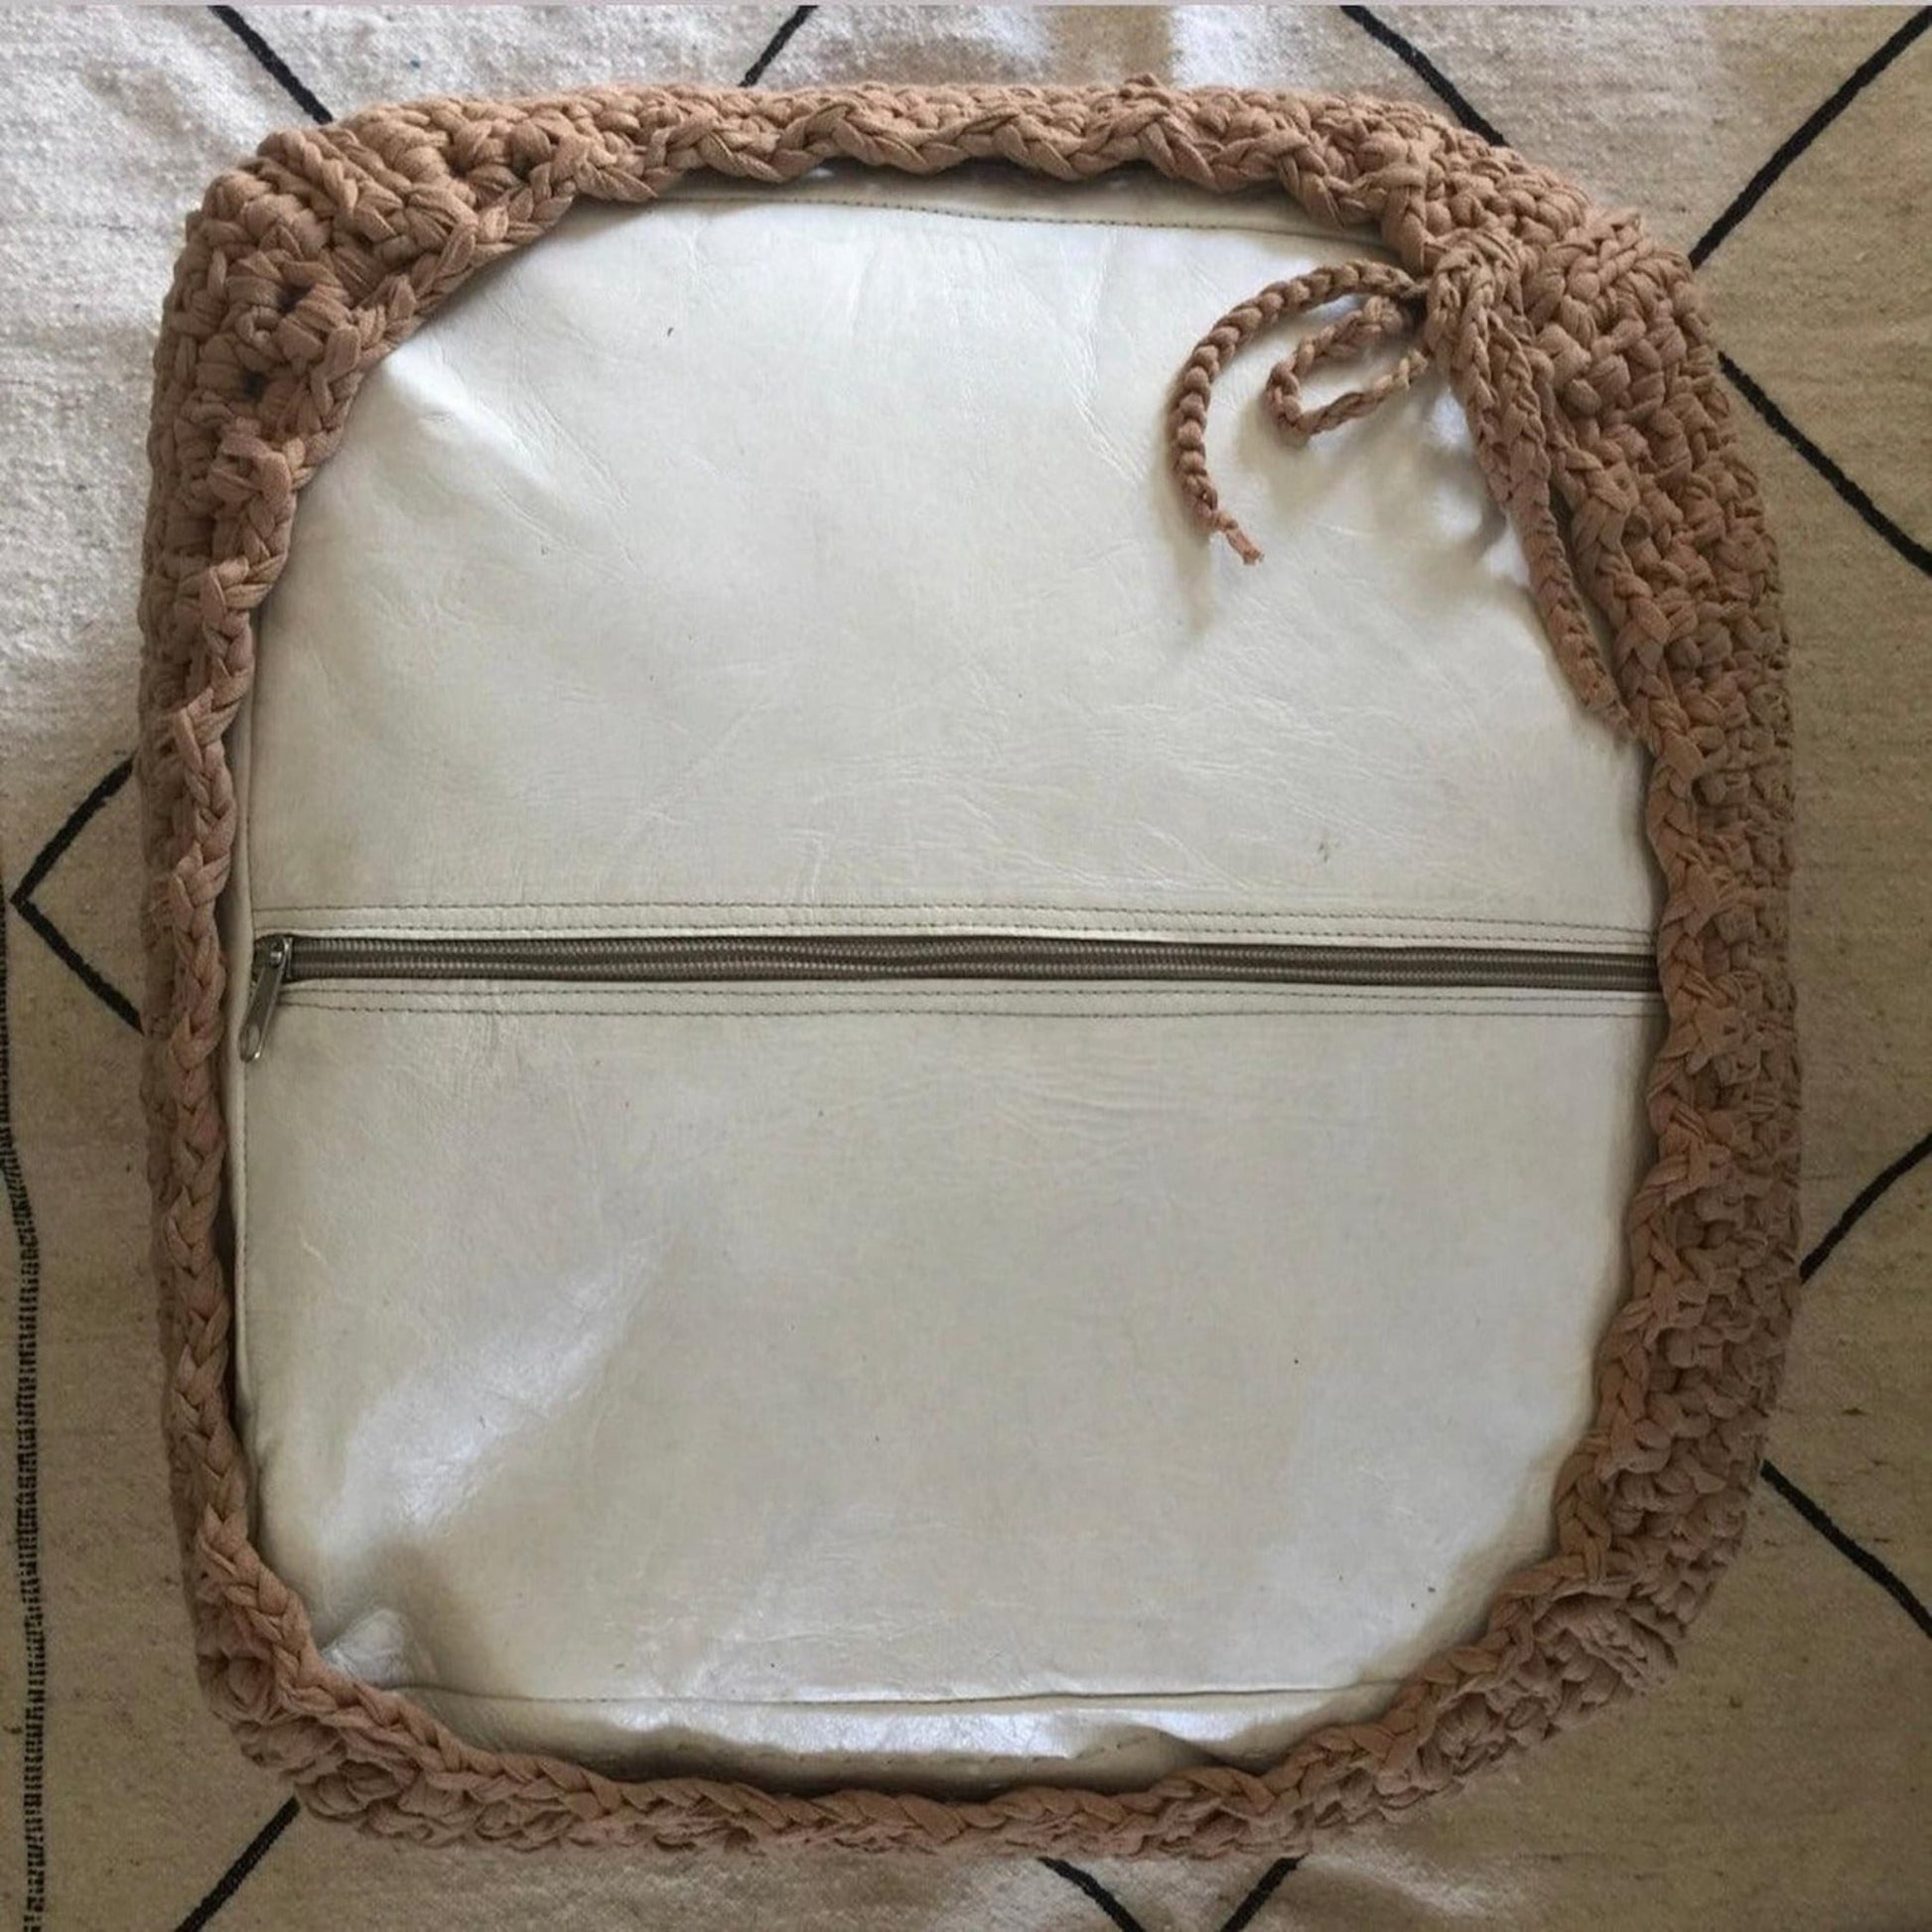 Bottom of a white square ottoman showing how the crochet cover works